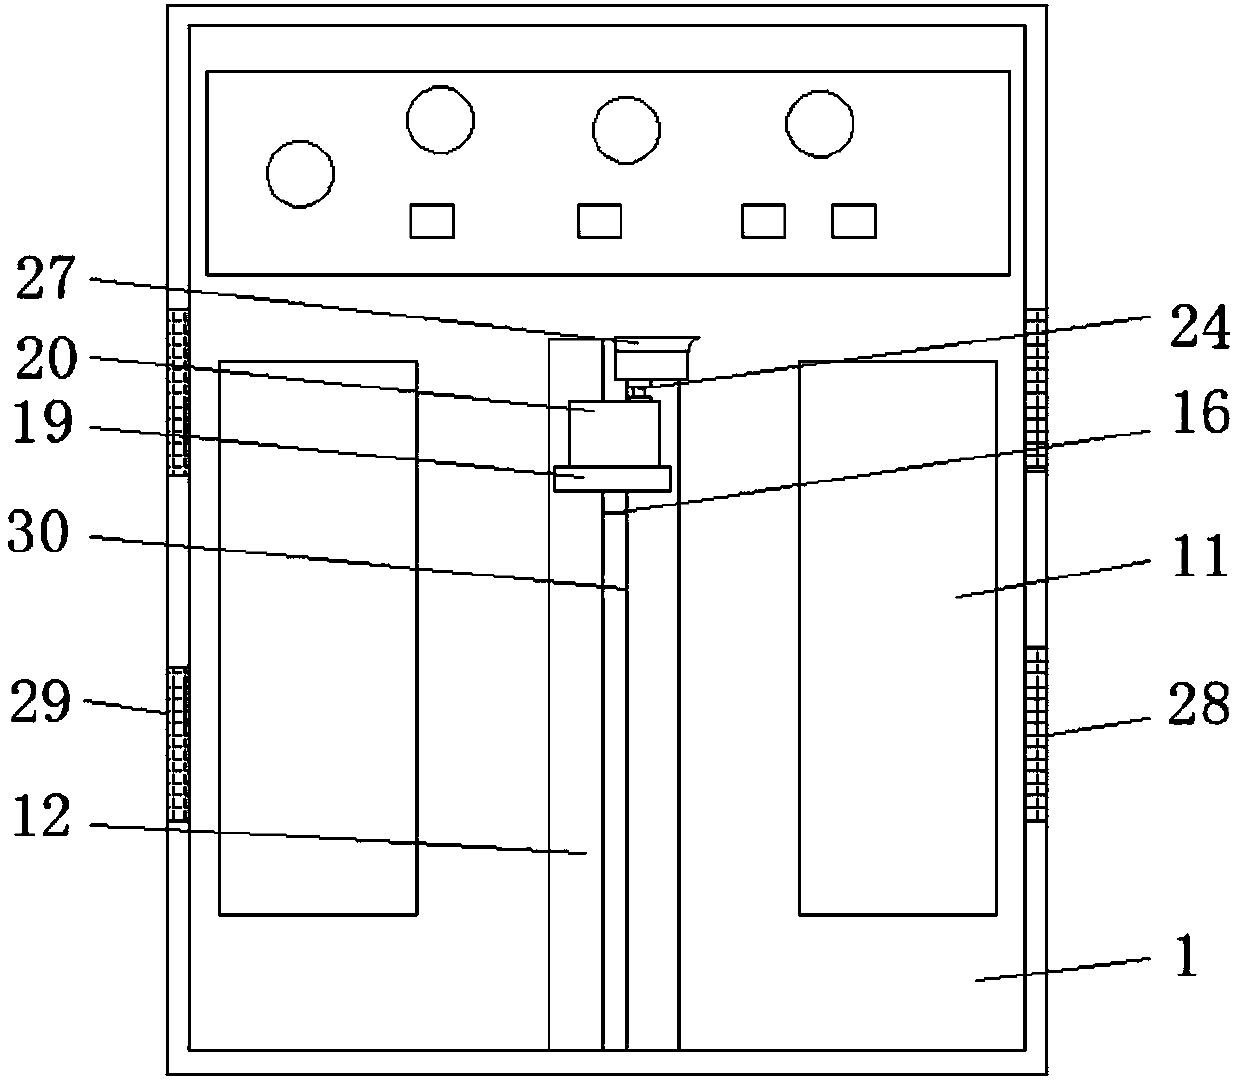 Movable high-low voltage switchgear with monitoring function